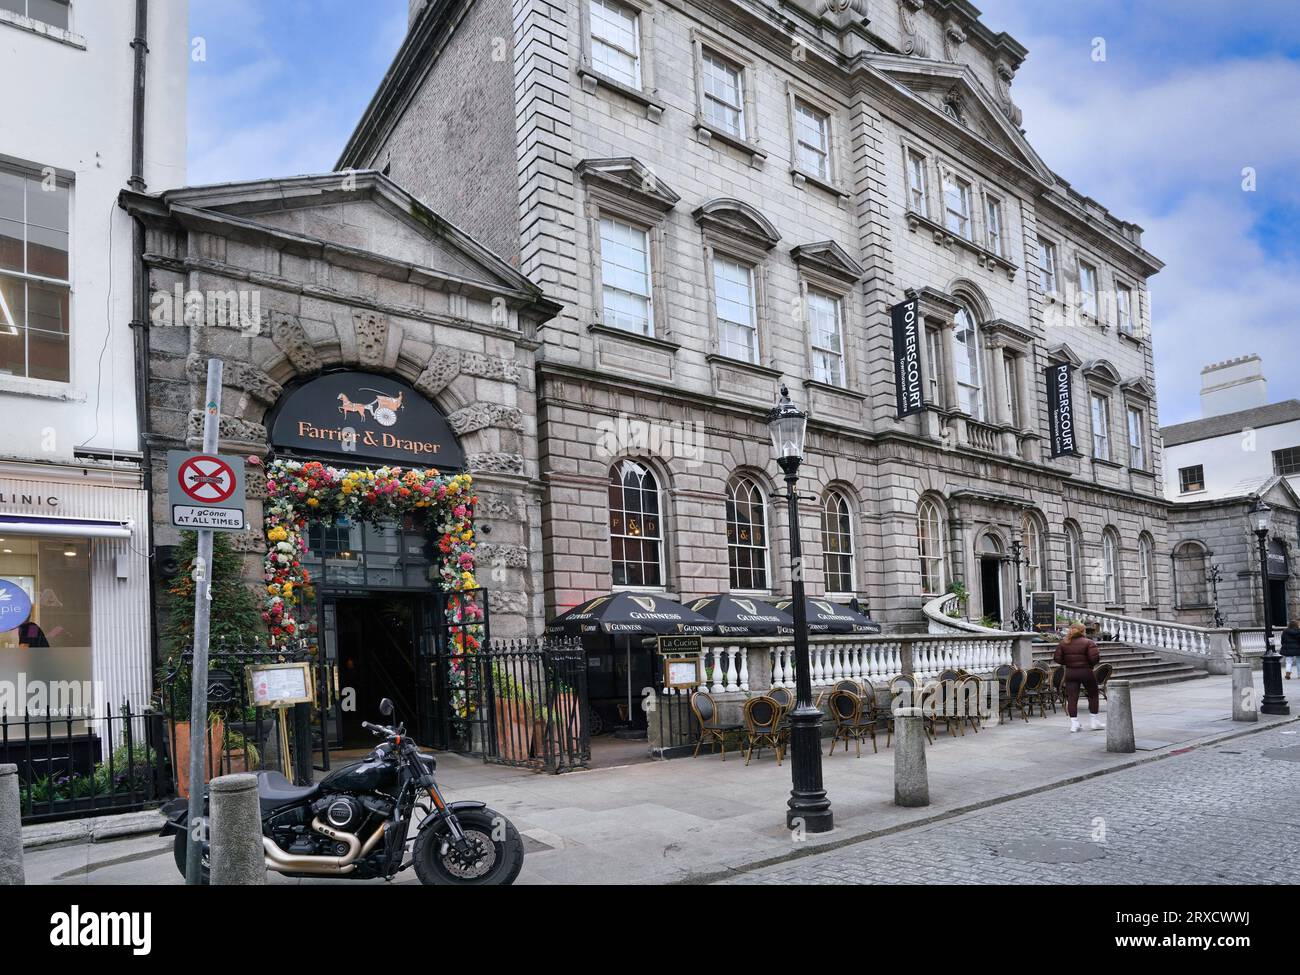 Dublin aristocrat's house from 1700s, converted into shops and restaurants Stock Photo